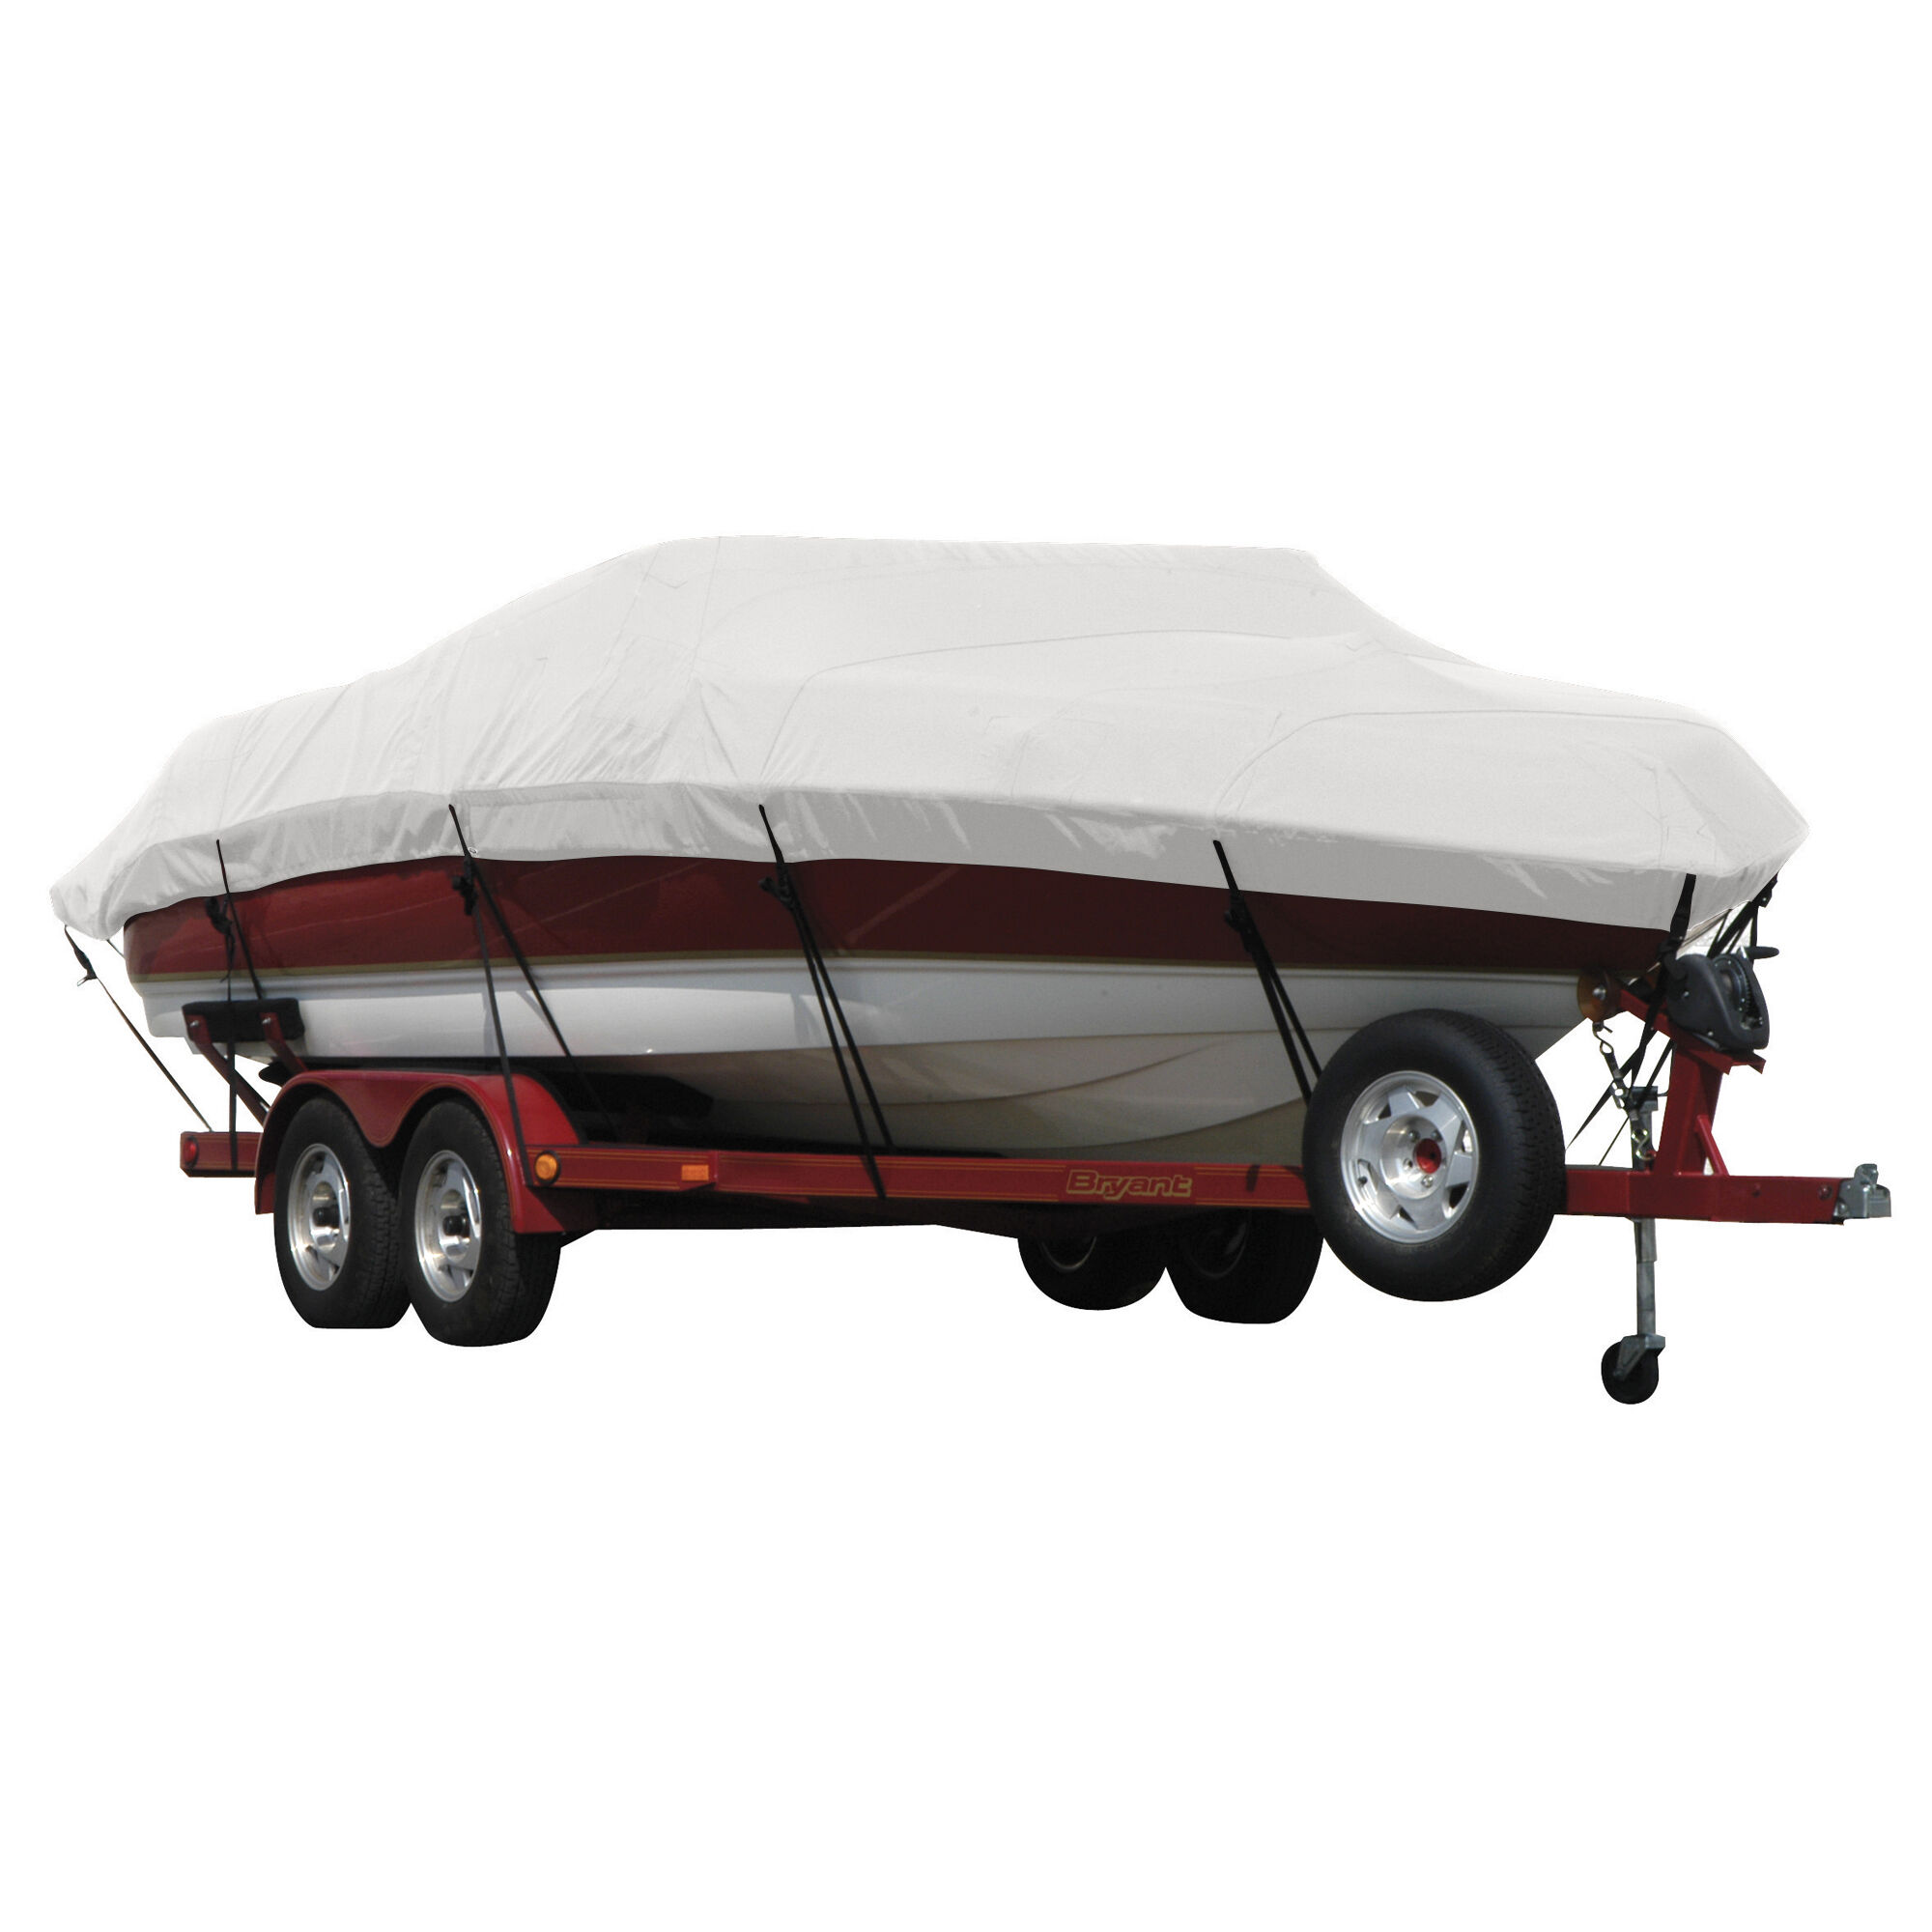 Covermate Exact Fit Sunbrella Boat Cover for Tige 2100 2100 Br Does Not Cover Swim PLATFORMm. Natural in Natural Tan